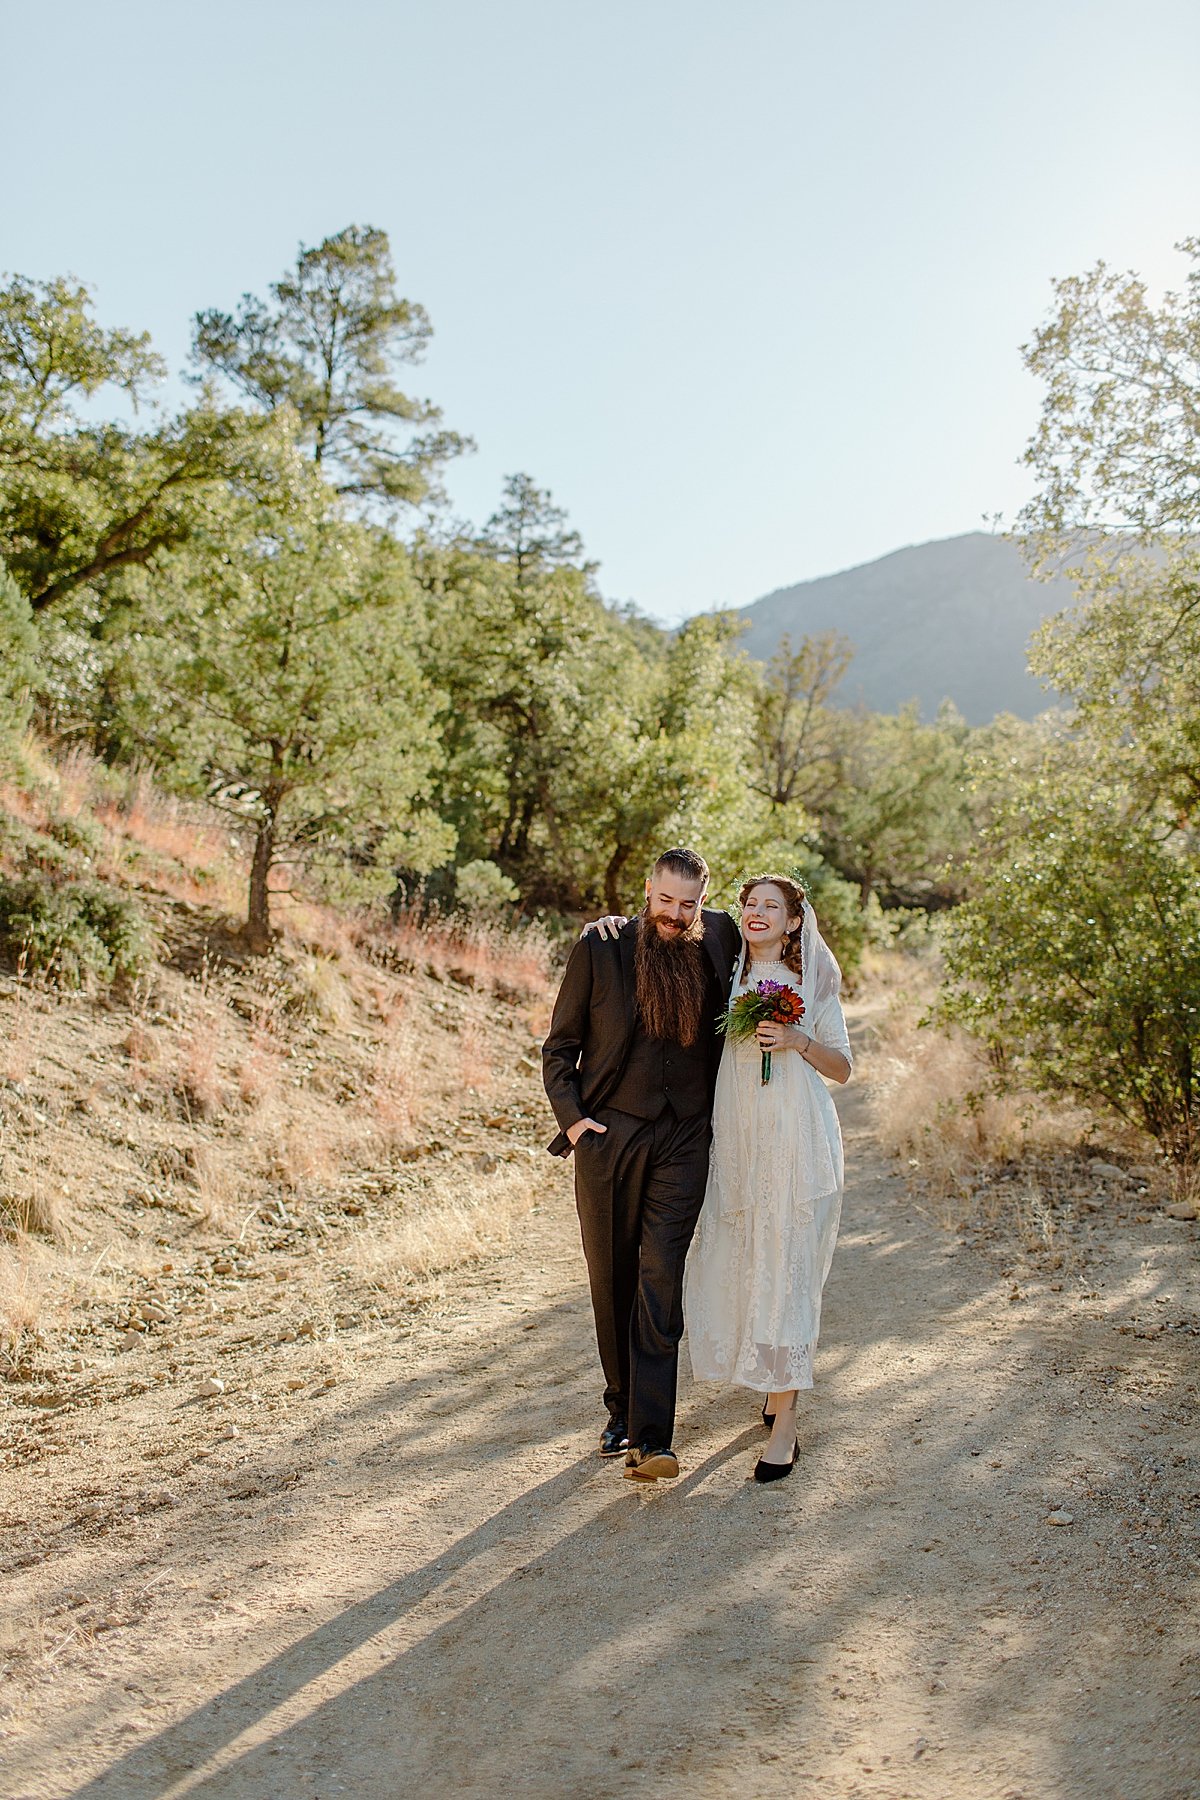  sunny skies in arizona on vow renewal day with bride and groom by elopement photographer   